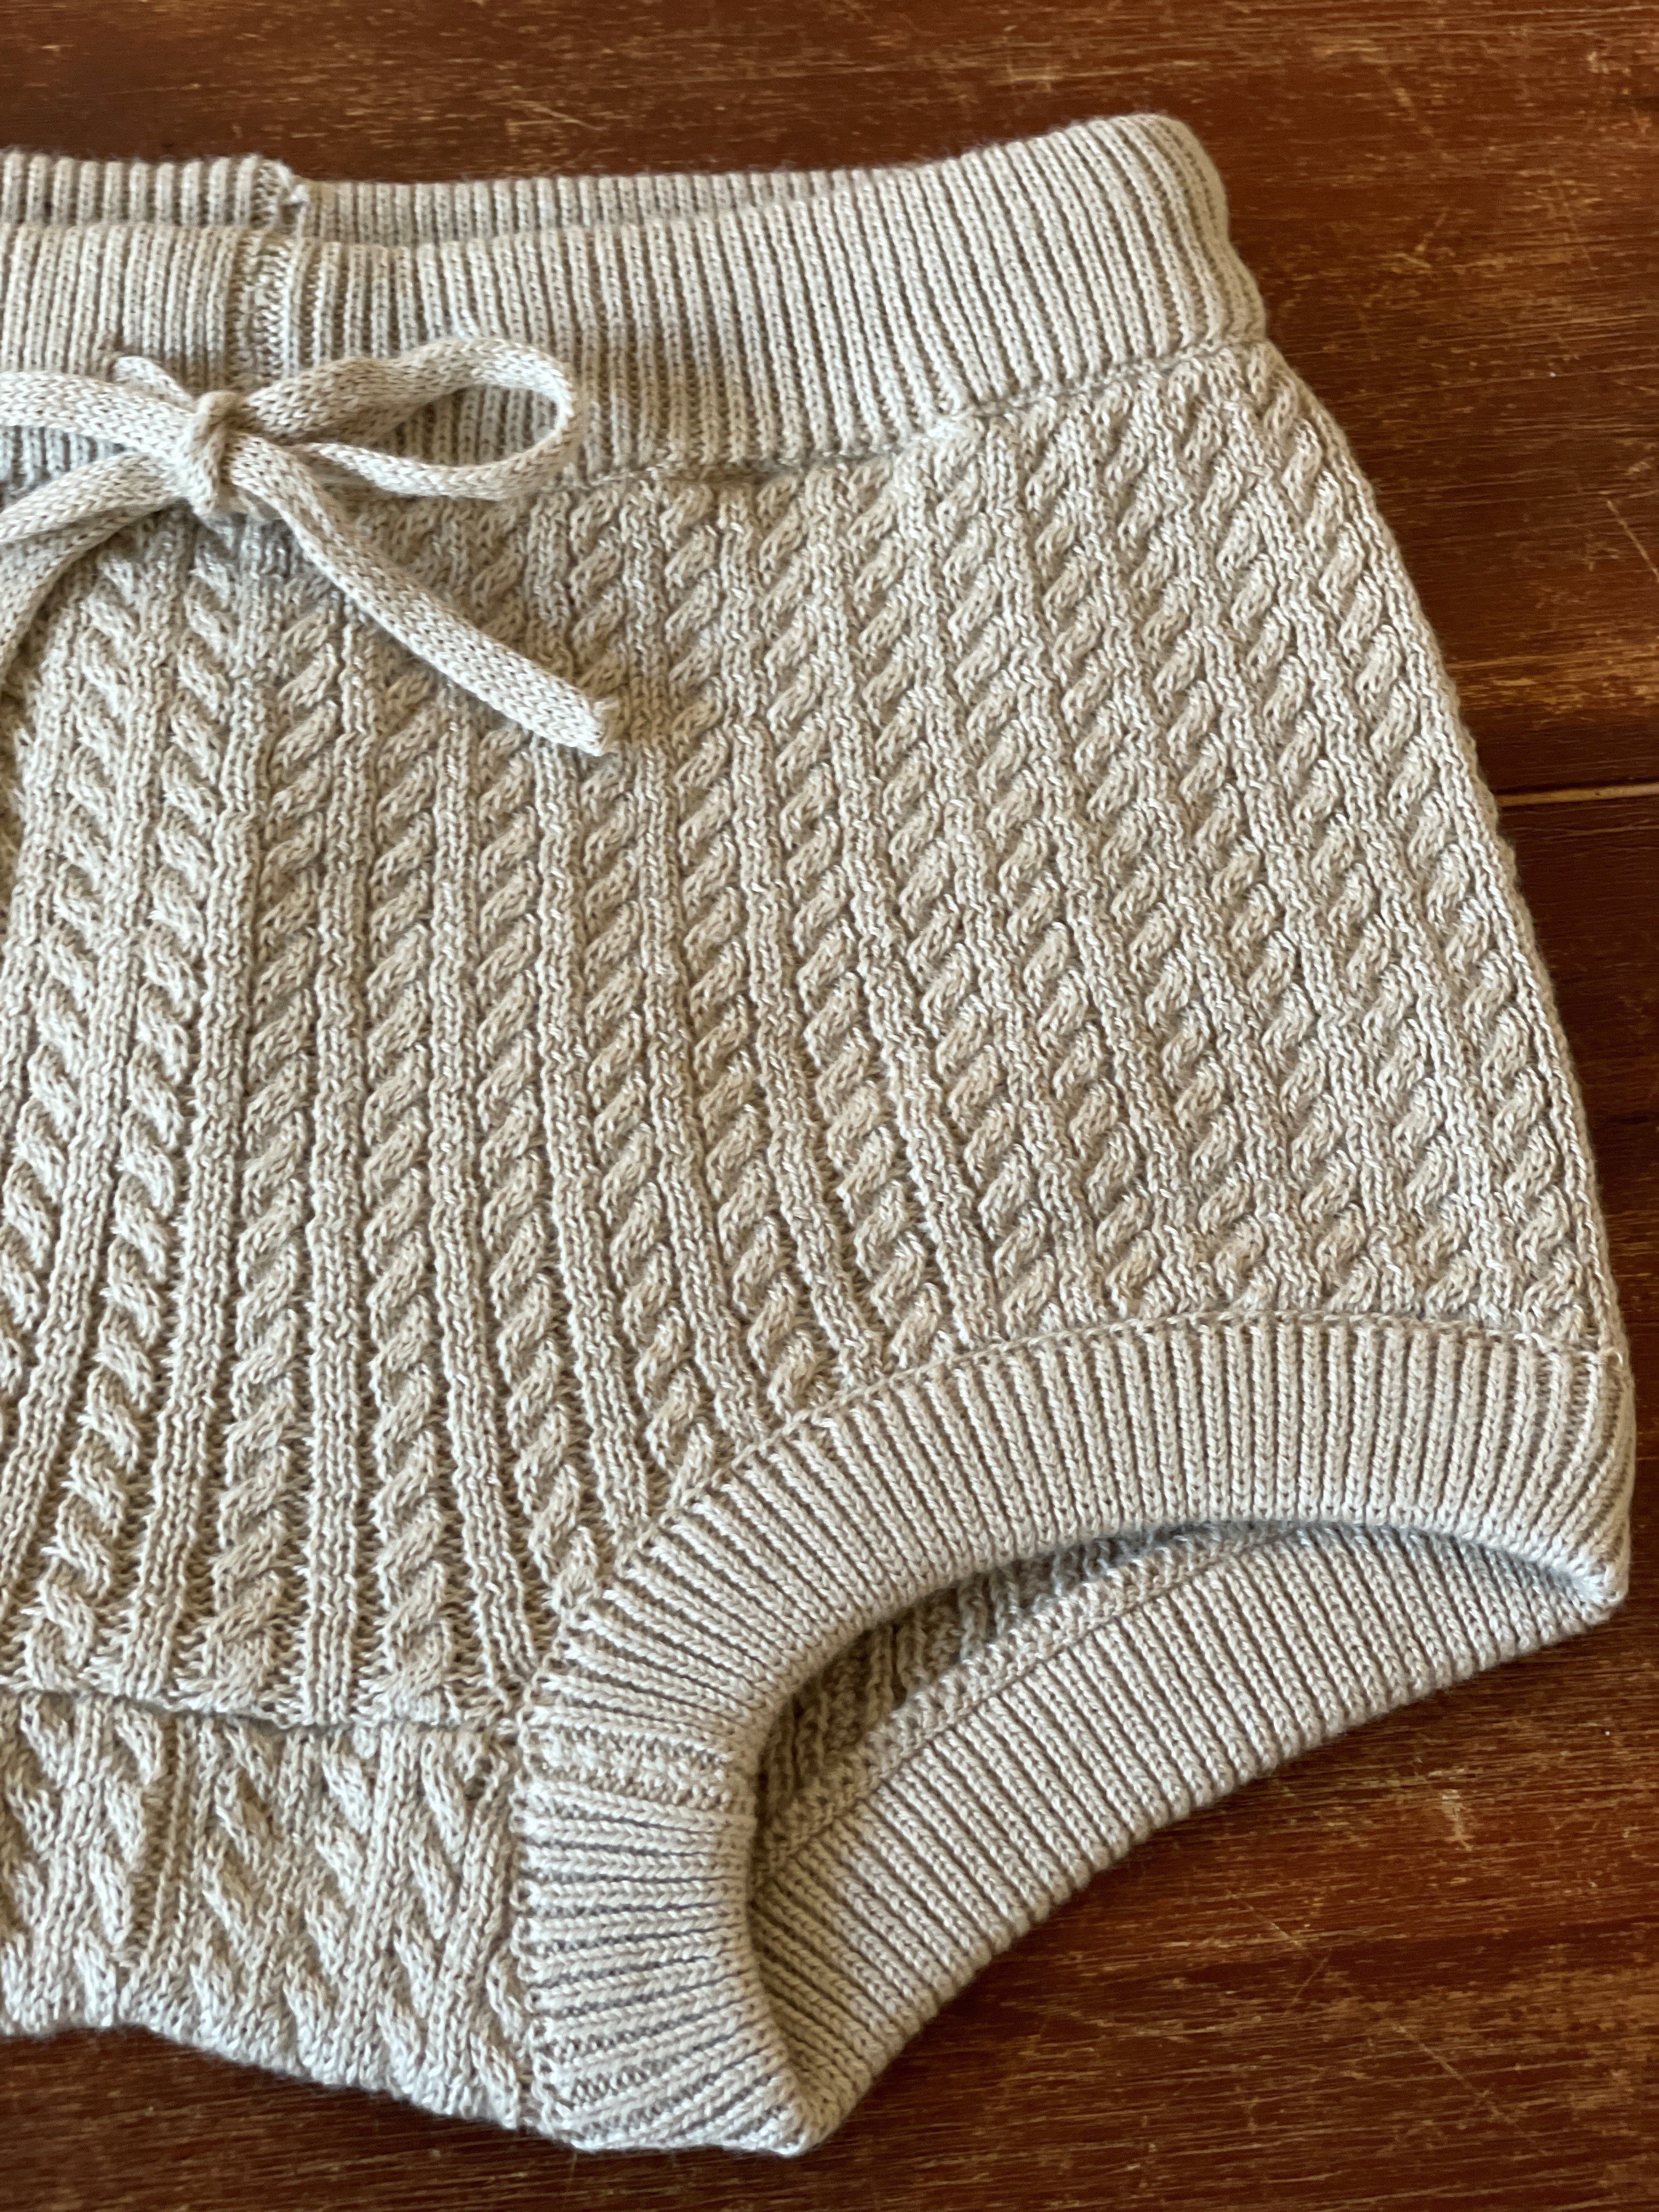 Knit cable bloomers - Feather